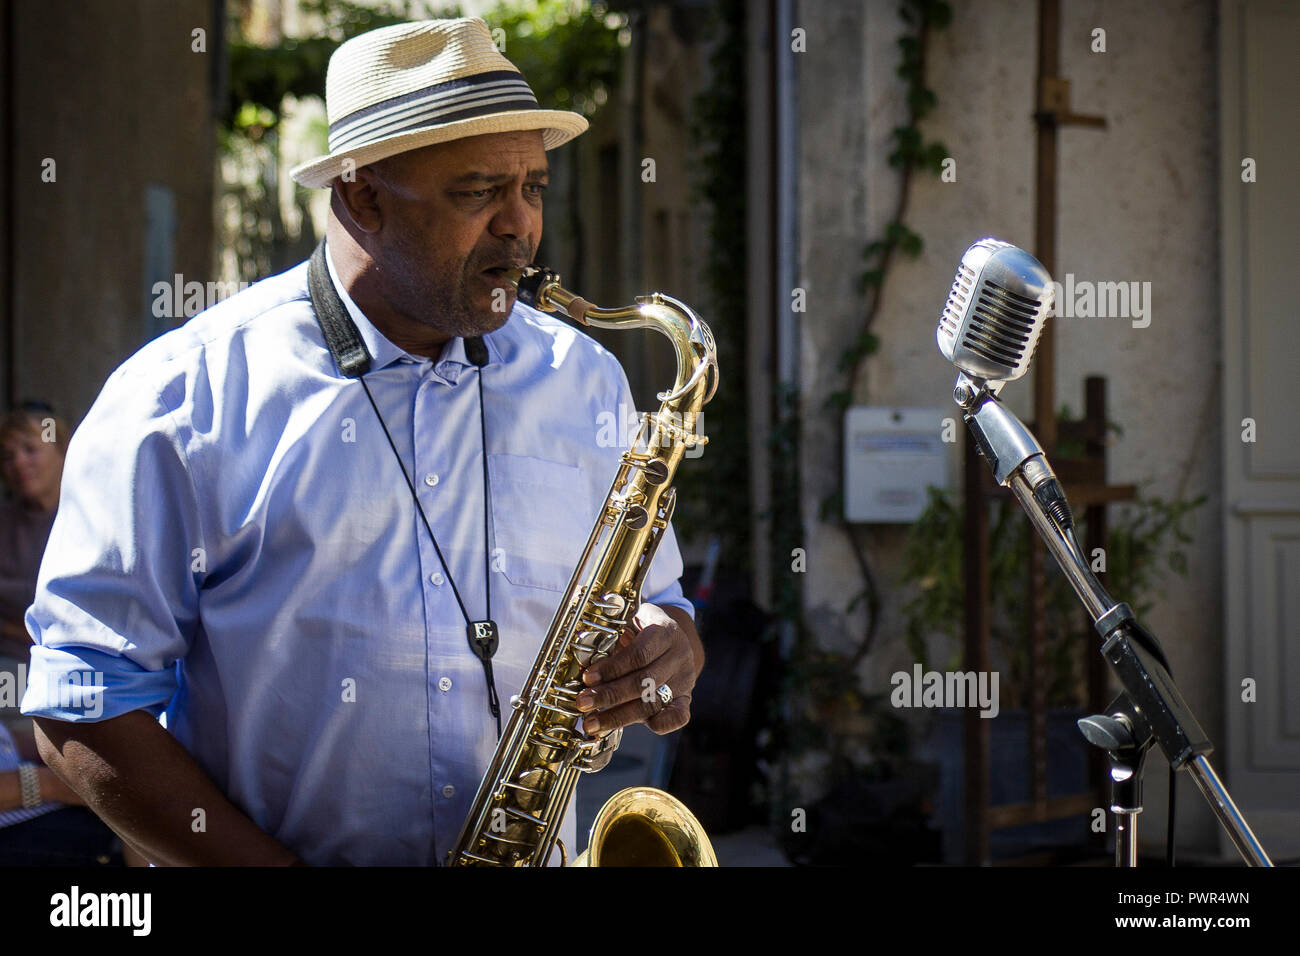 Musician playing saxophon on street in French village Stock Photo